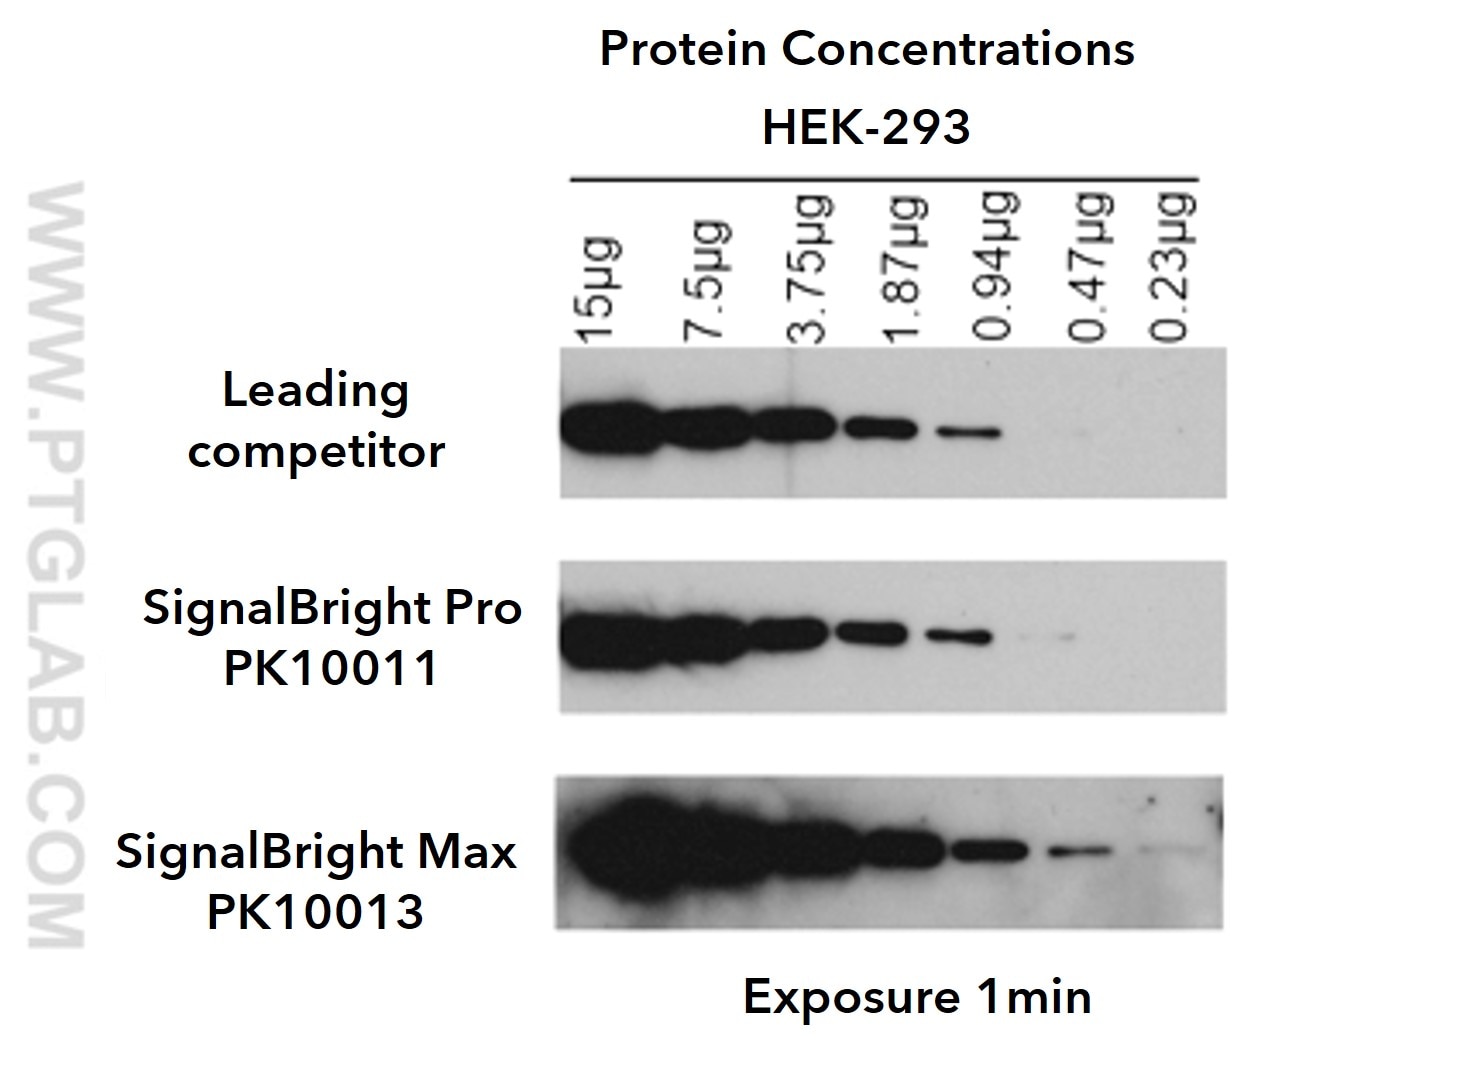 signalbright protein concentrations